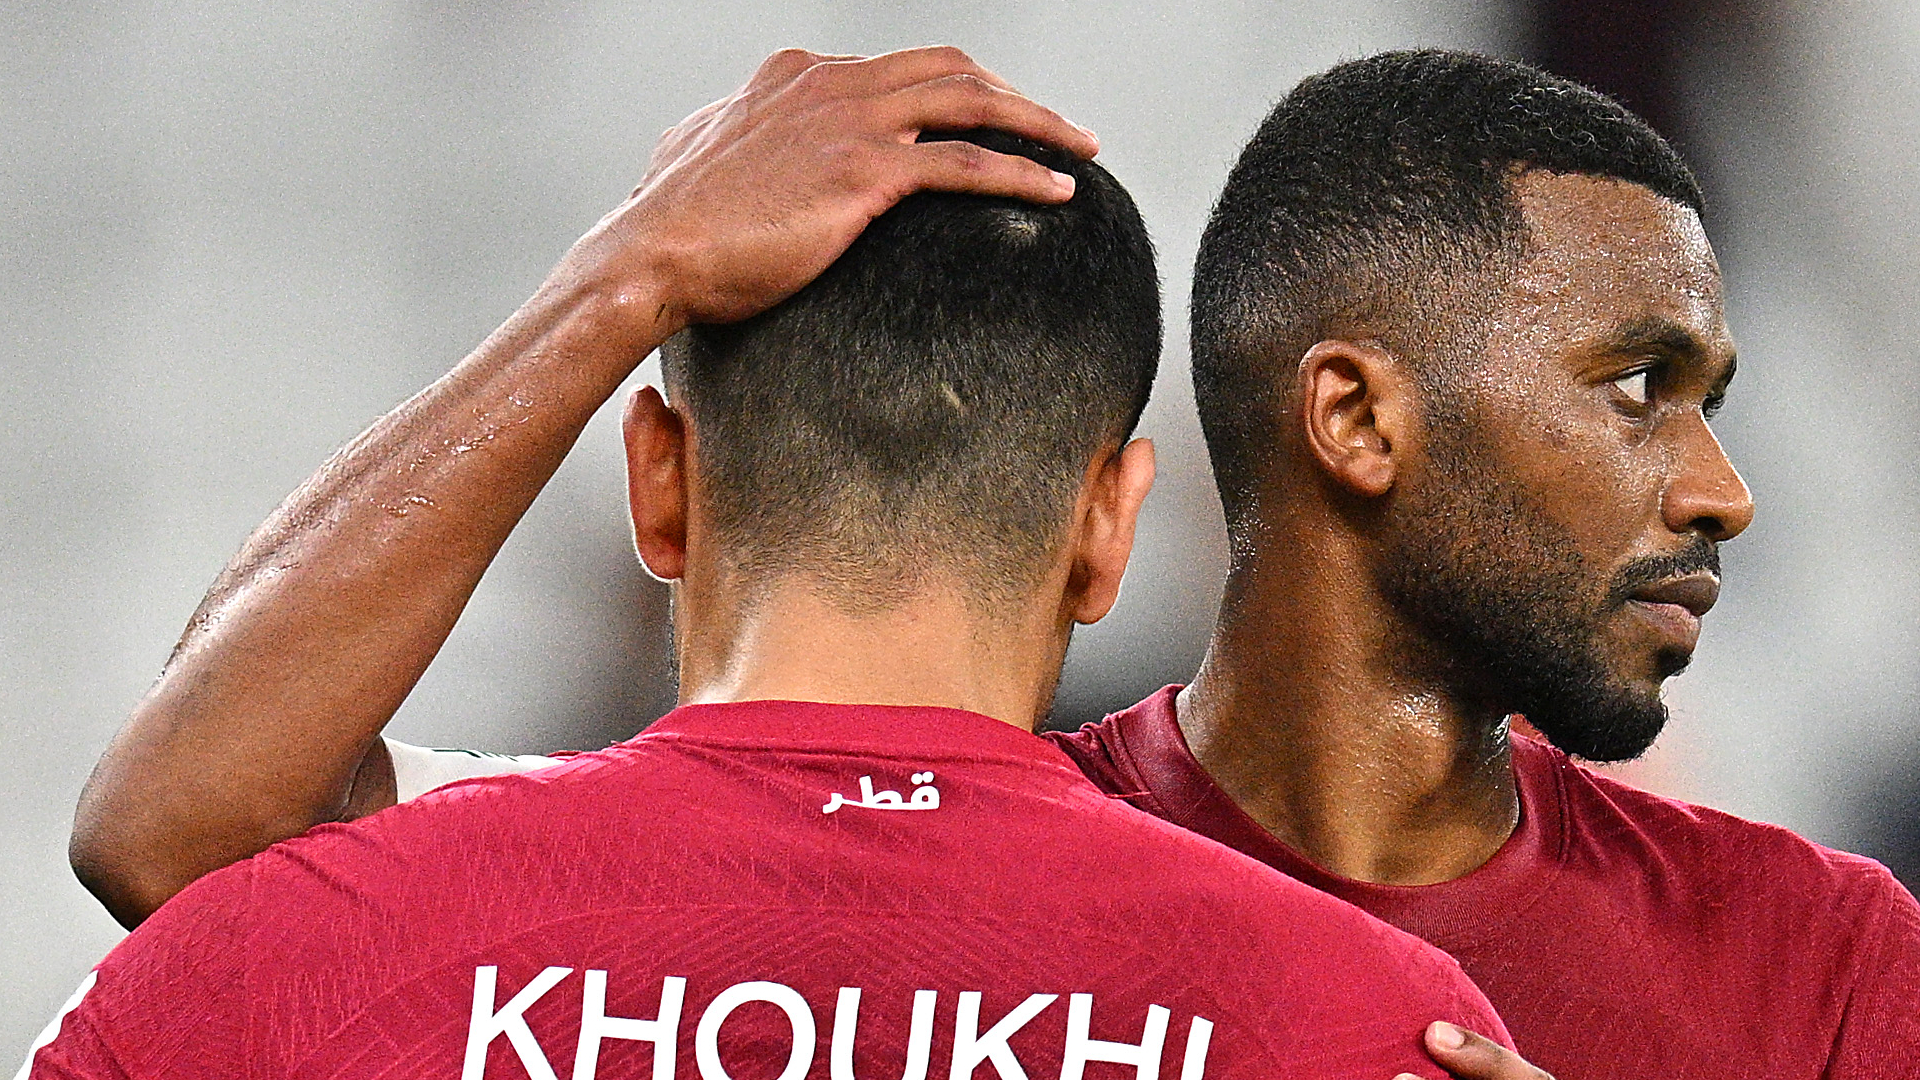 Qatar sets unwanted history with early World Cup exit